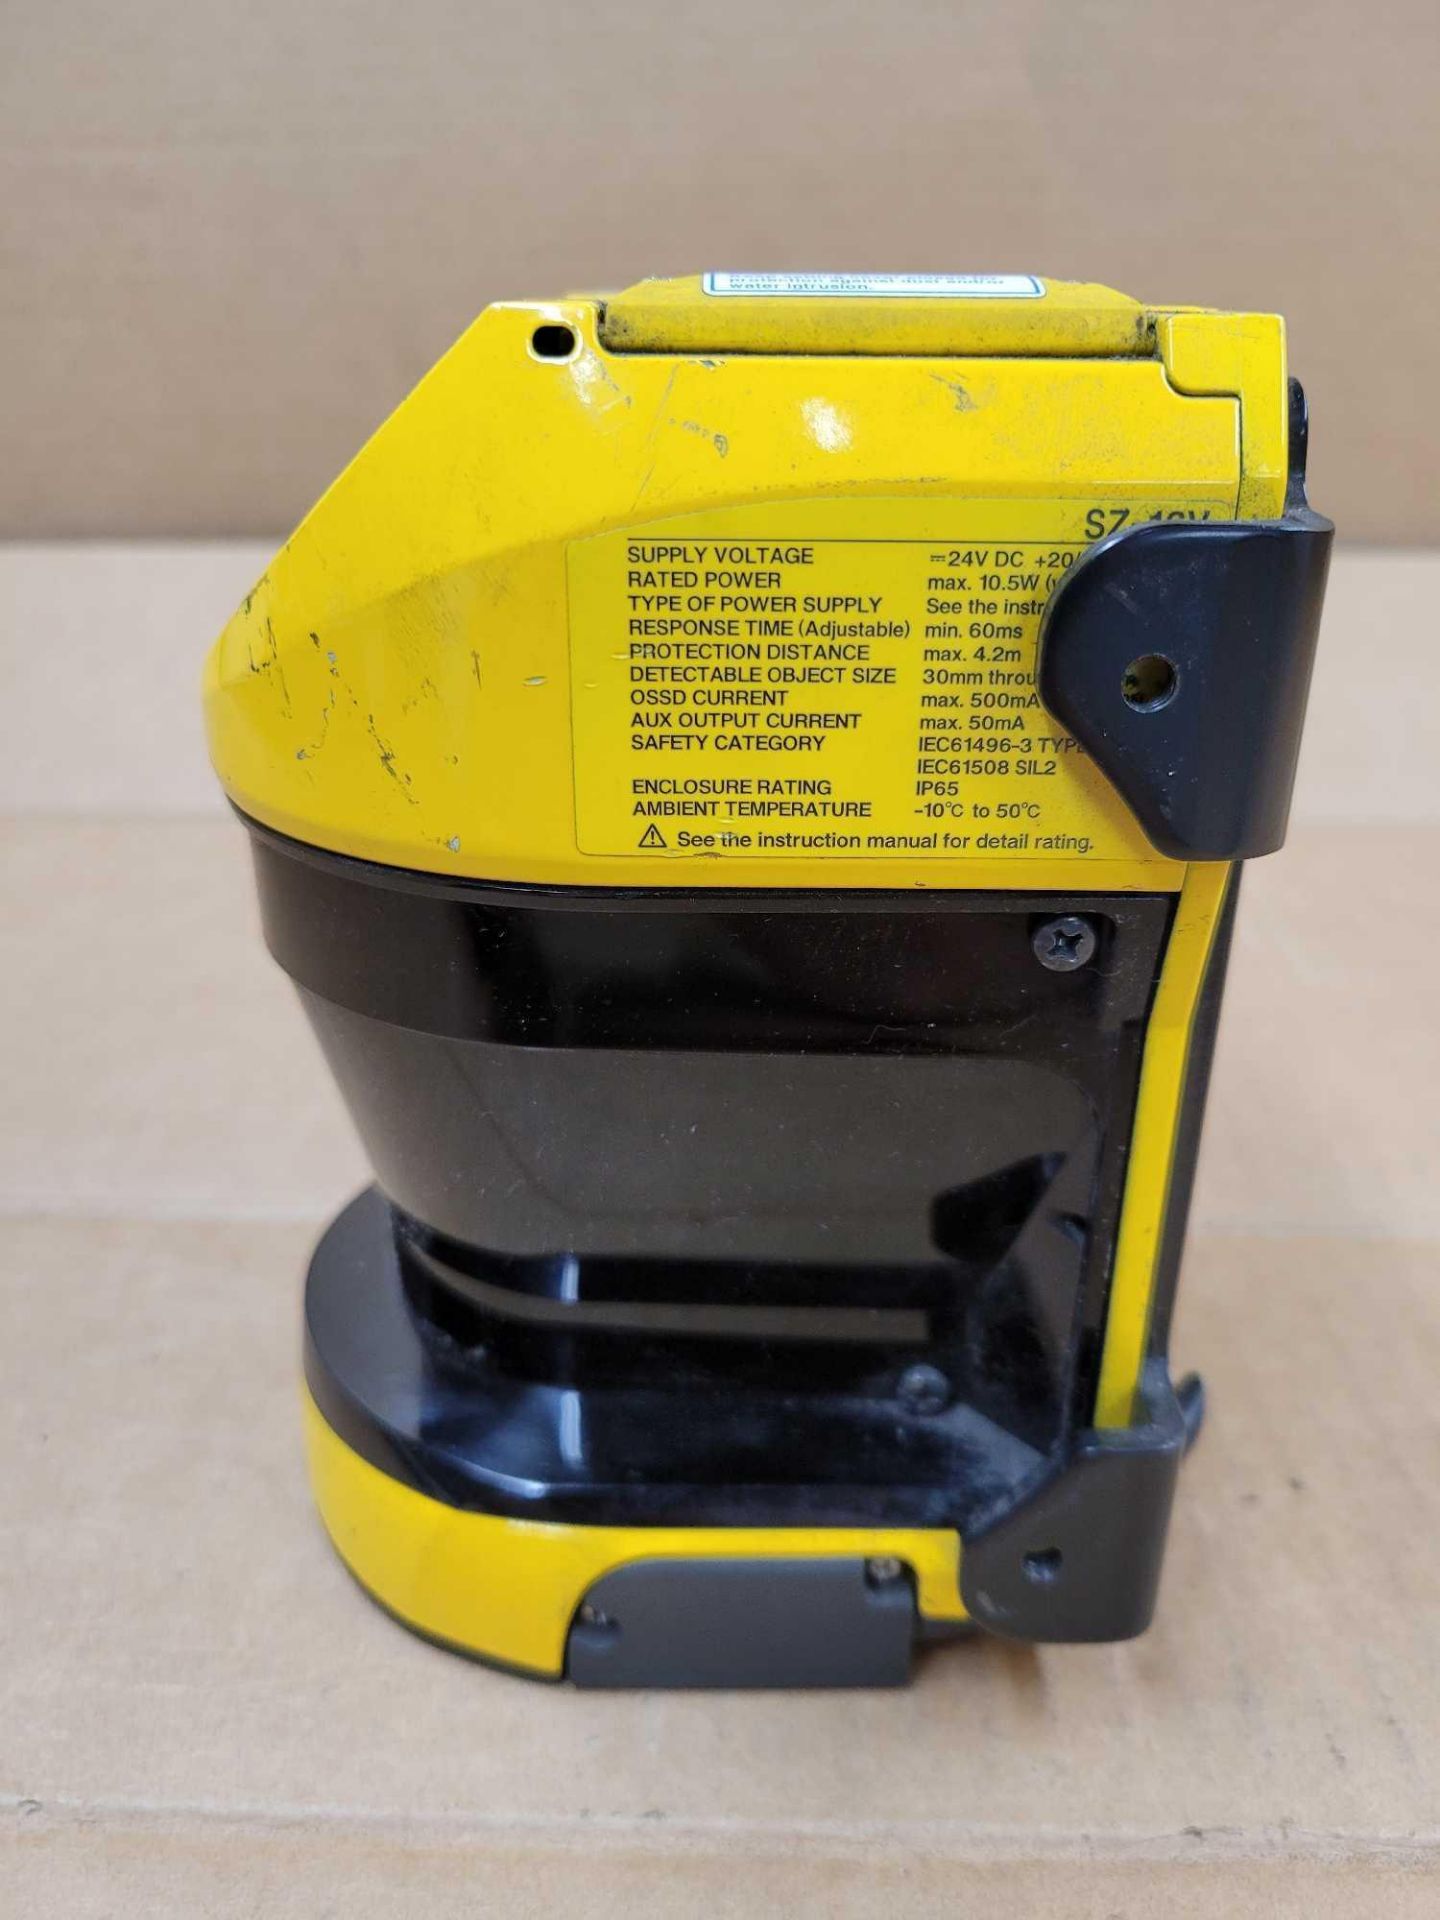 KEYENCE SZ-16V / Safety Laser Scanner  /  Lot Weight: 4.2 lbs - Image 5 of 7